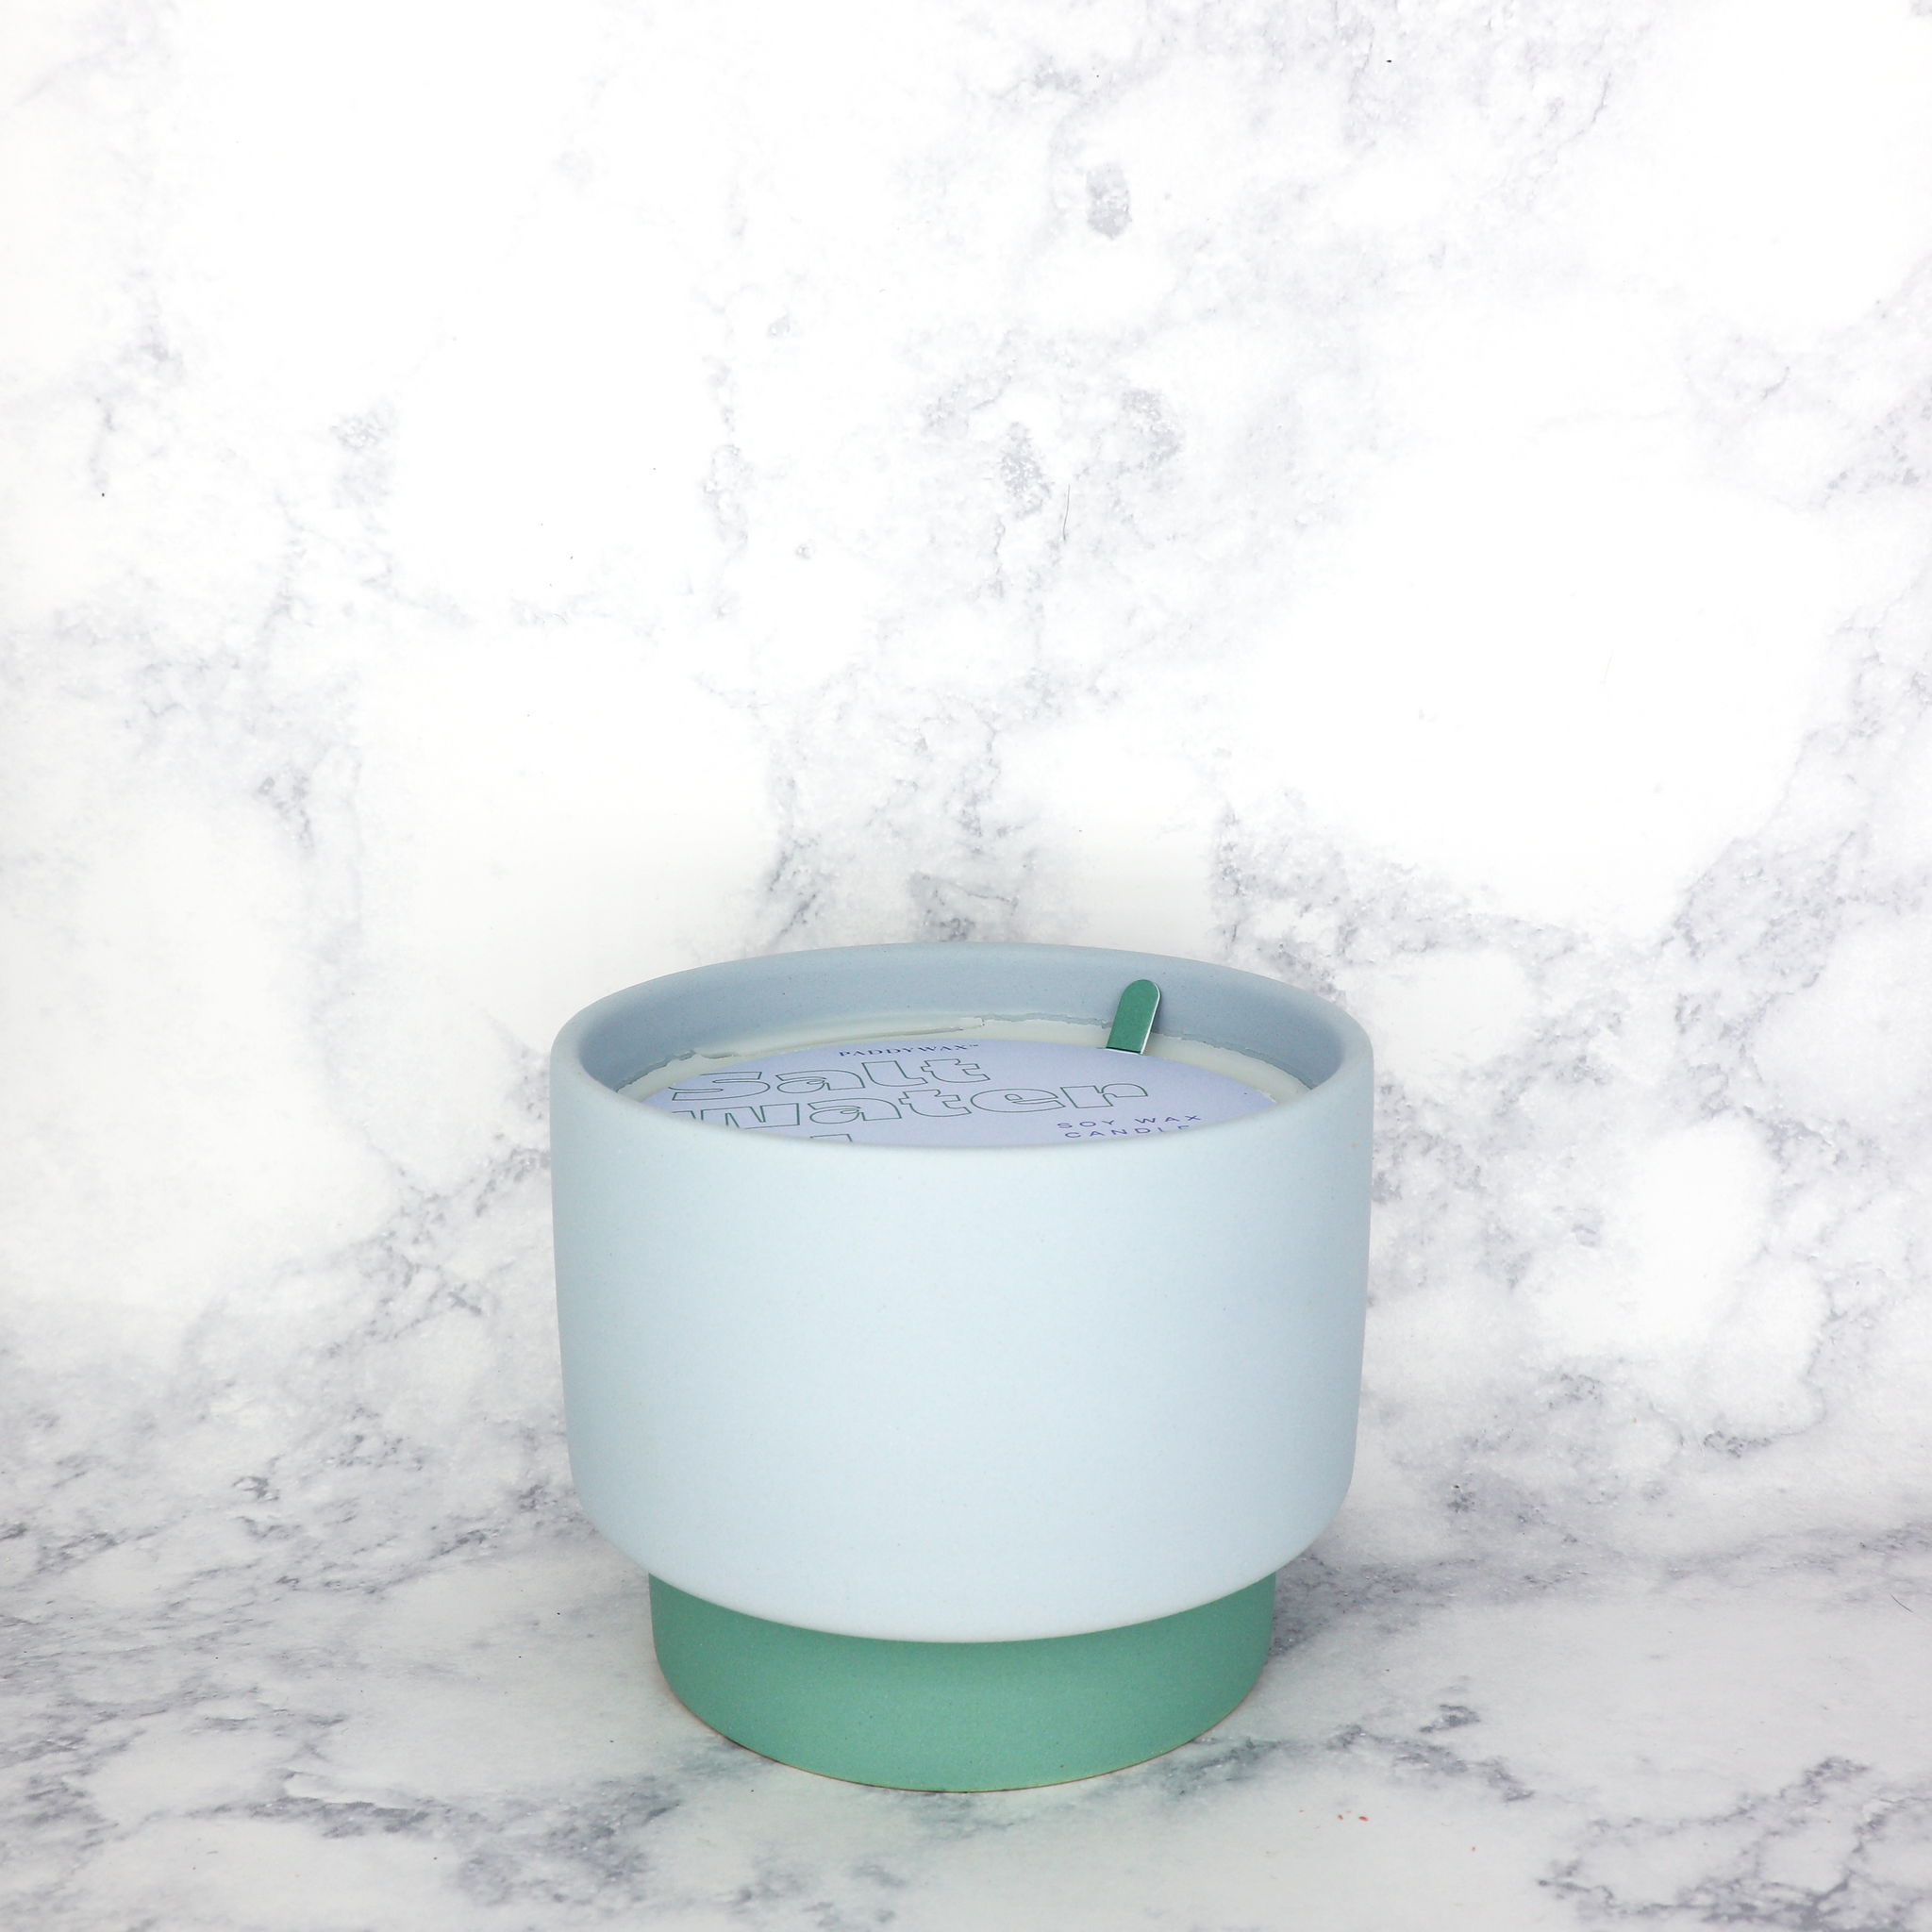 Saltwater Suede Colorblock Ceramic Soy Wax Large Candle